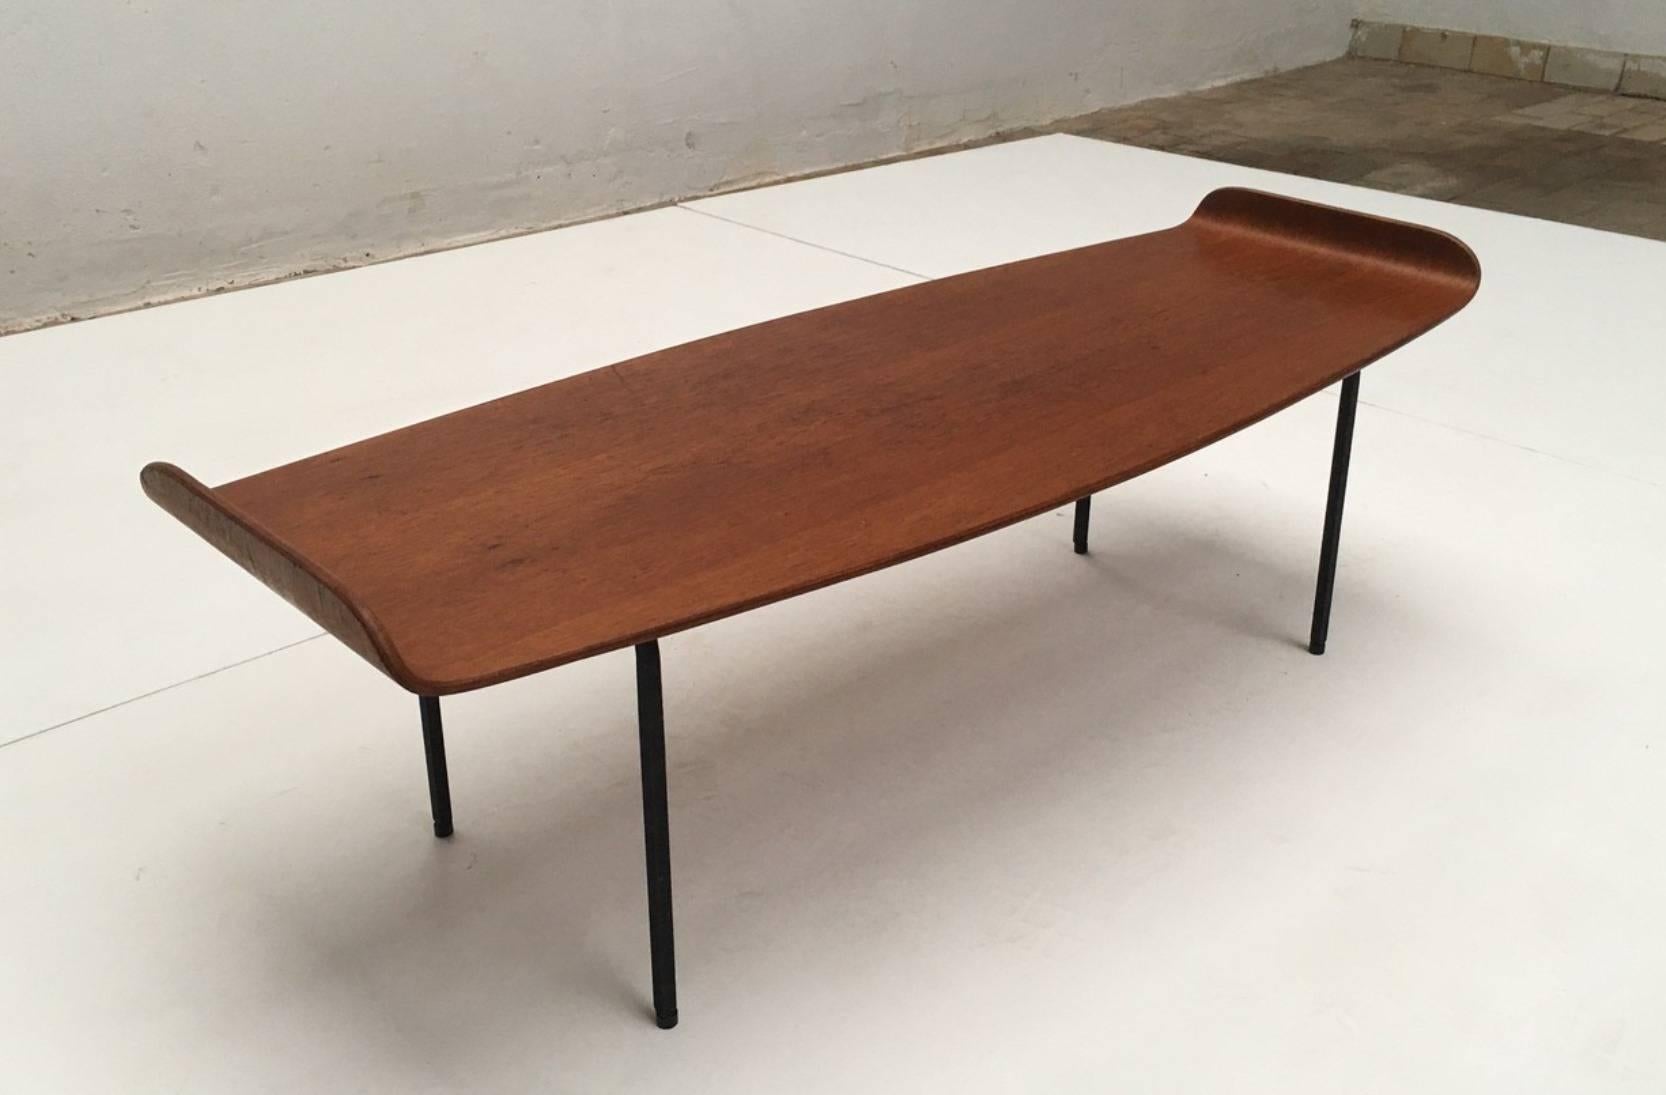 Mid-Century Modern 'Pilade' Coffee Table by Campo & Graffi, 1958 with label & impressed artists mark